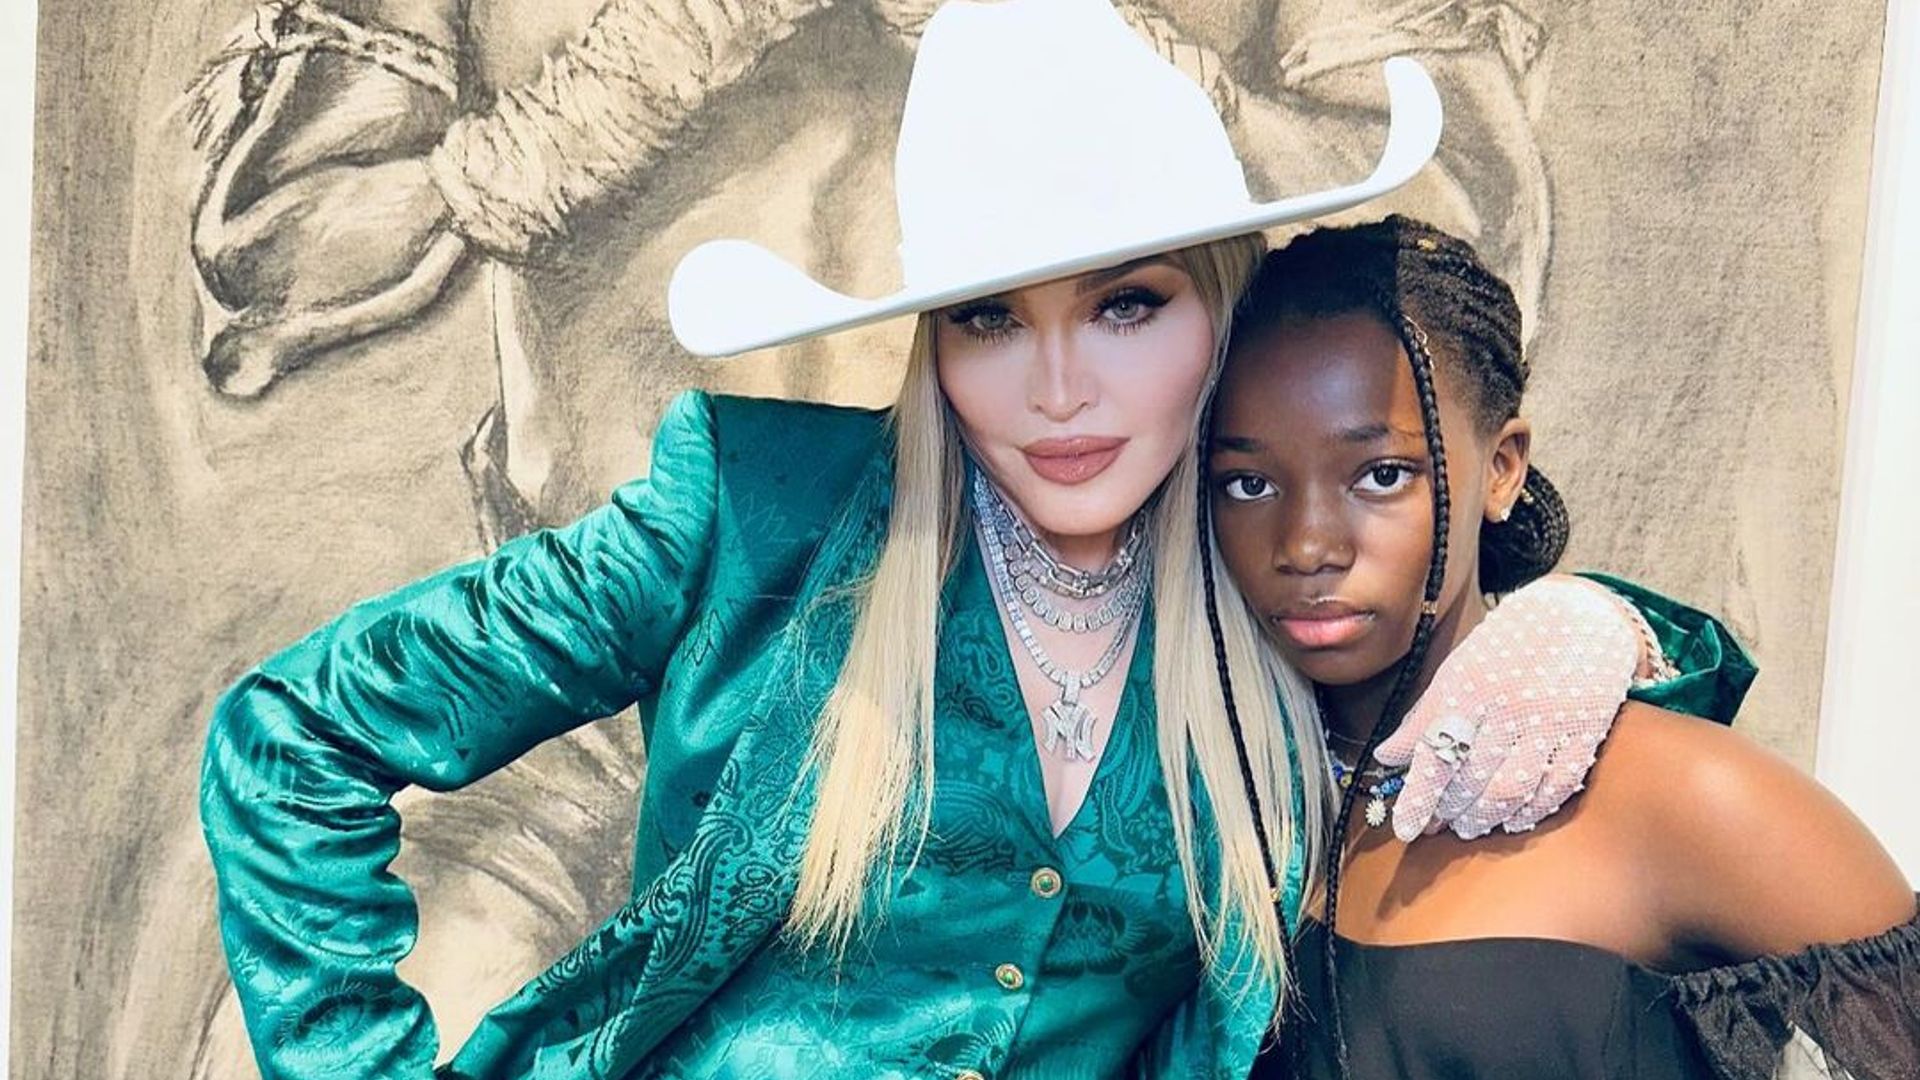 Madonna proudly attends son Rocco Ritchie's art opening with rare appearance of daughters Mercy, Stella and Estere